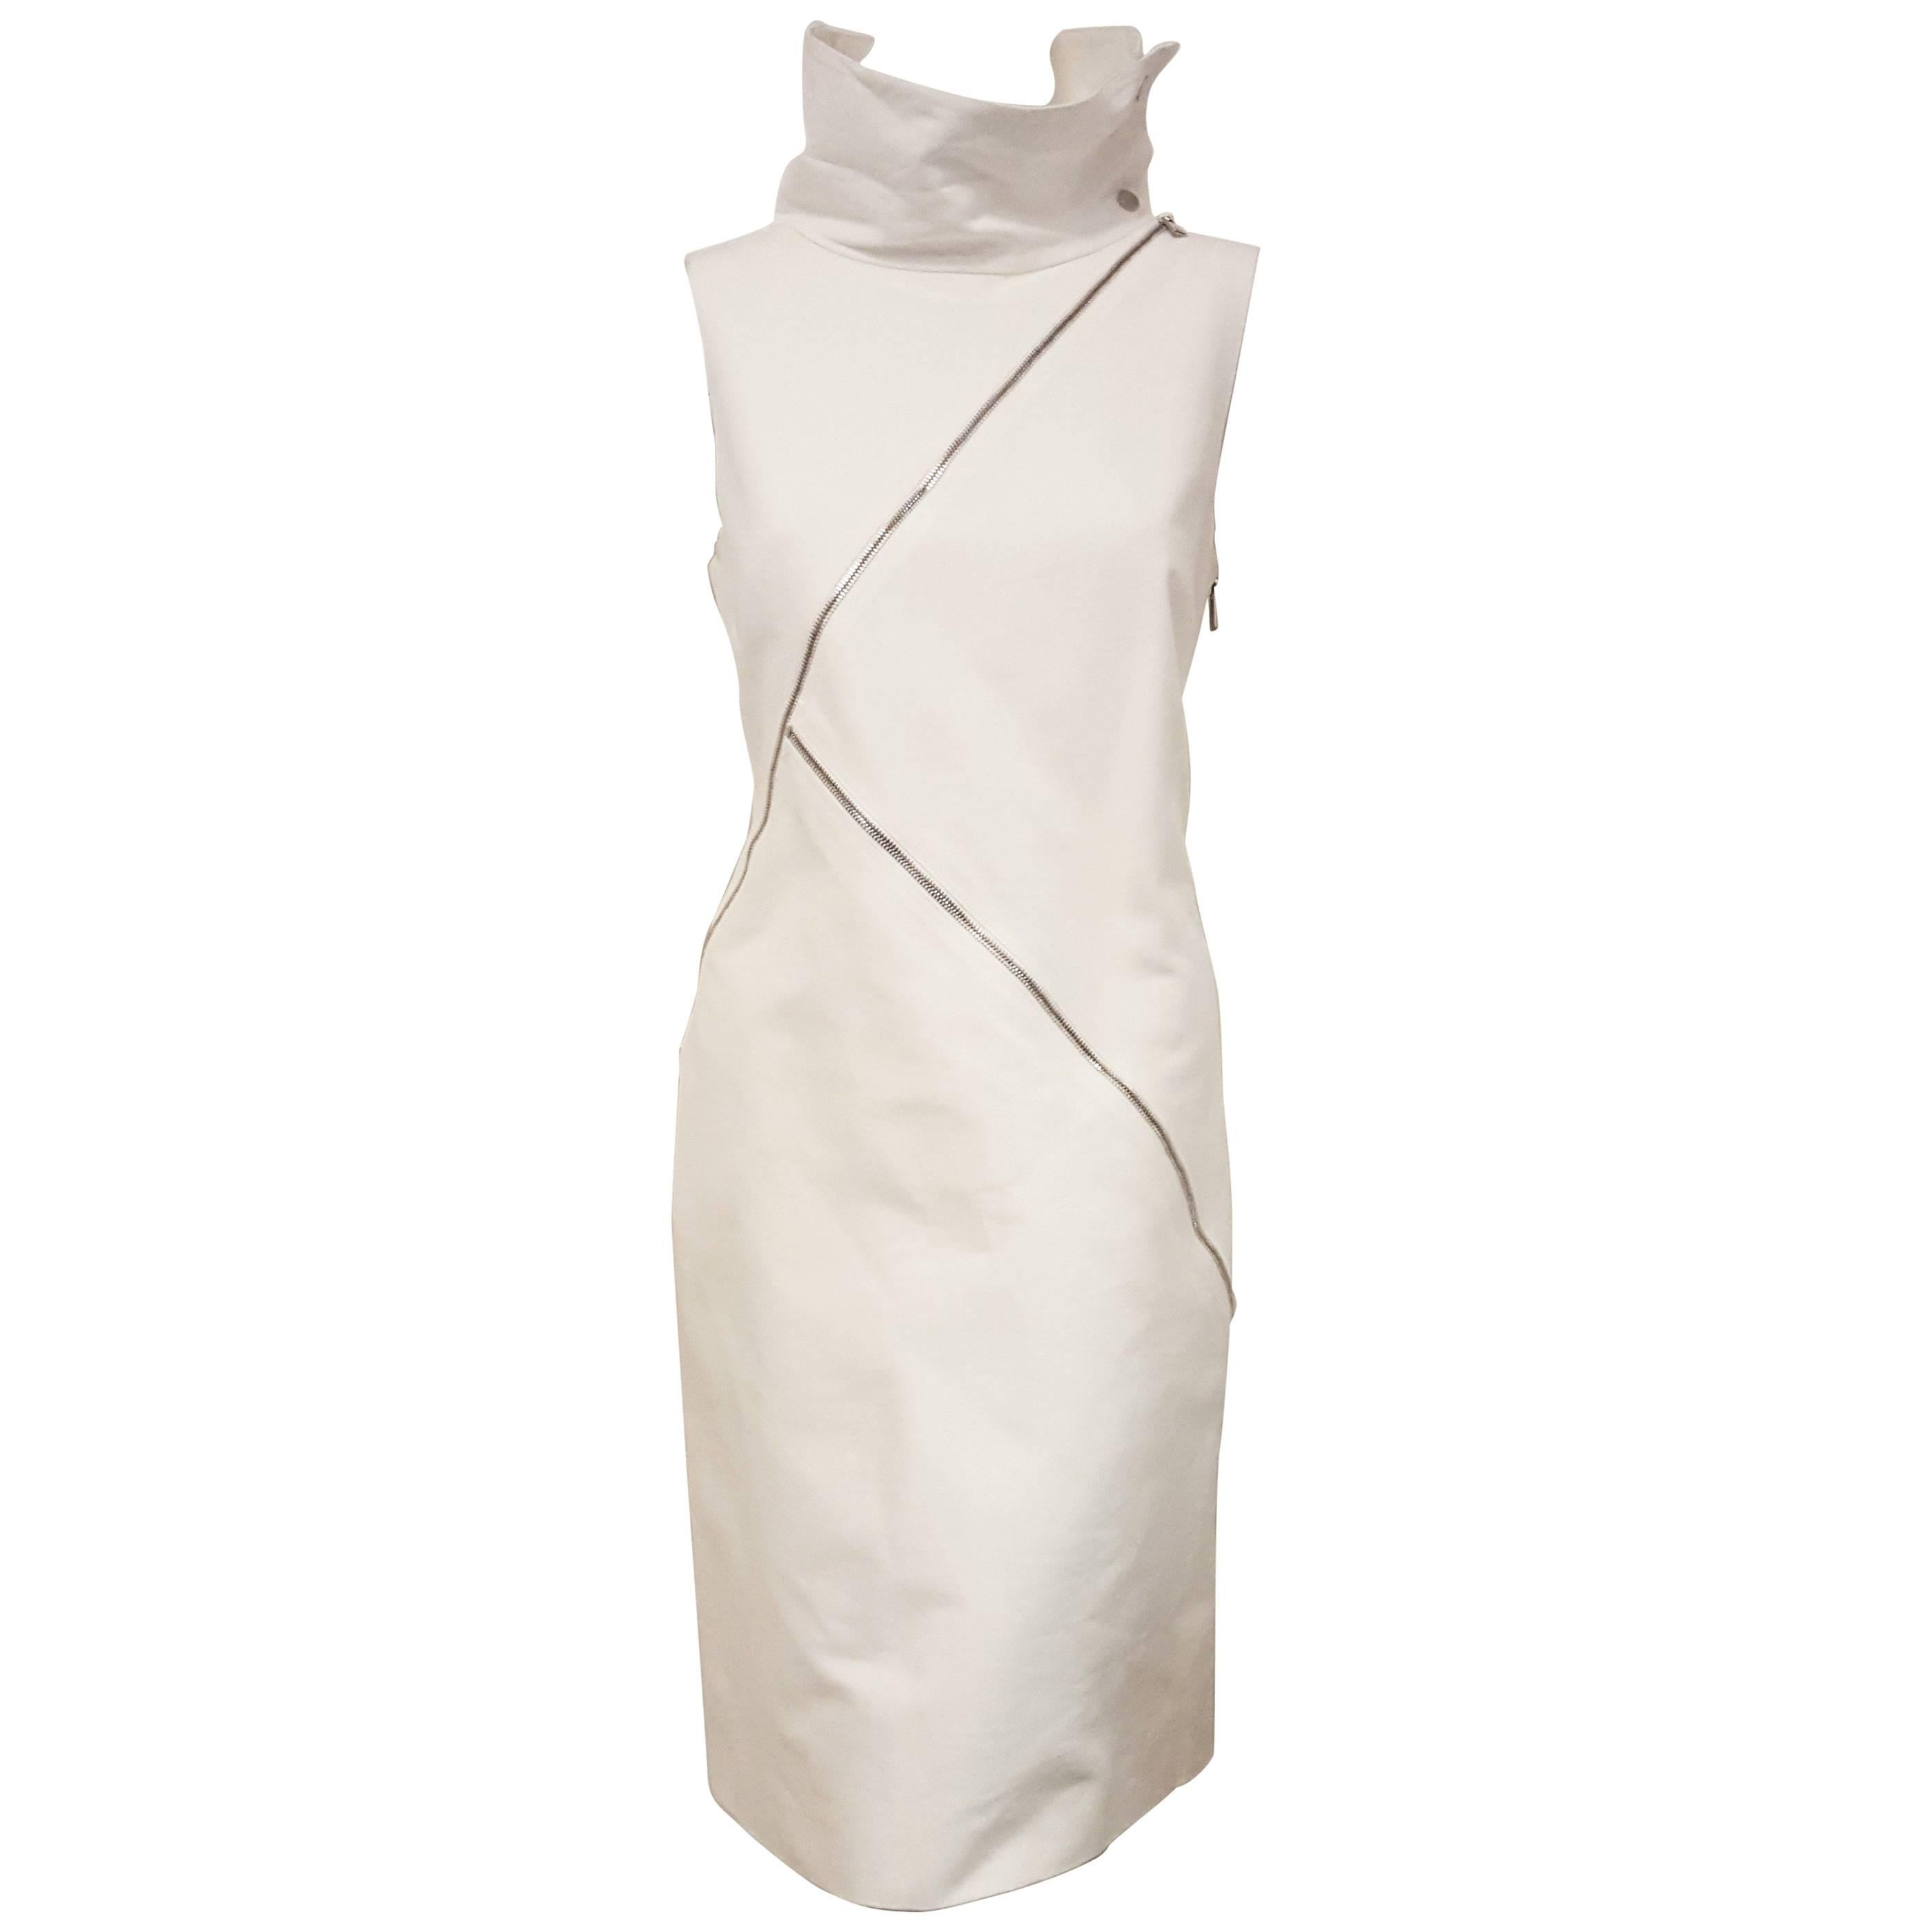 Michael Kors Ivory Multi Zippered Accented Dress For Sale